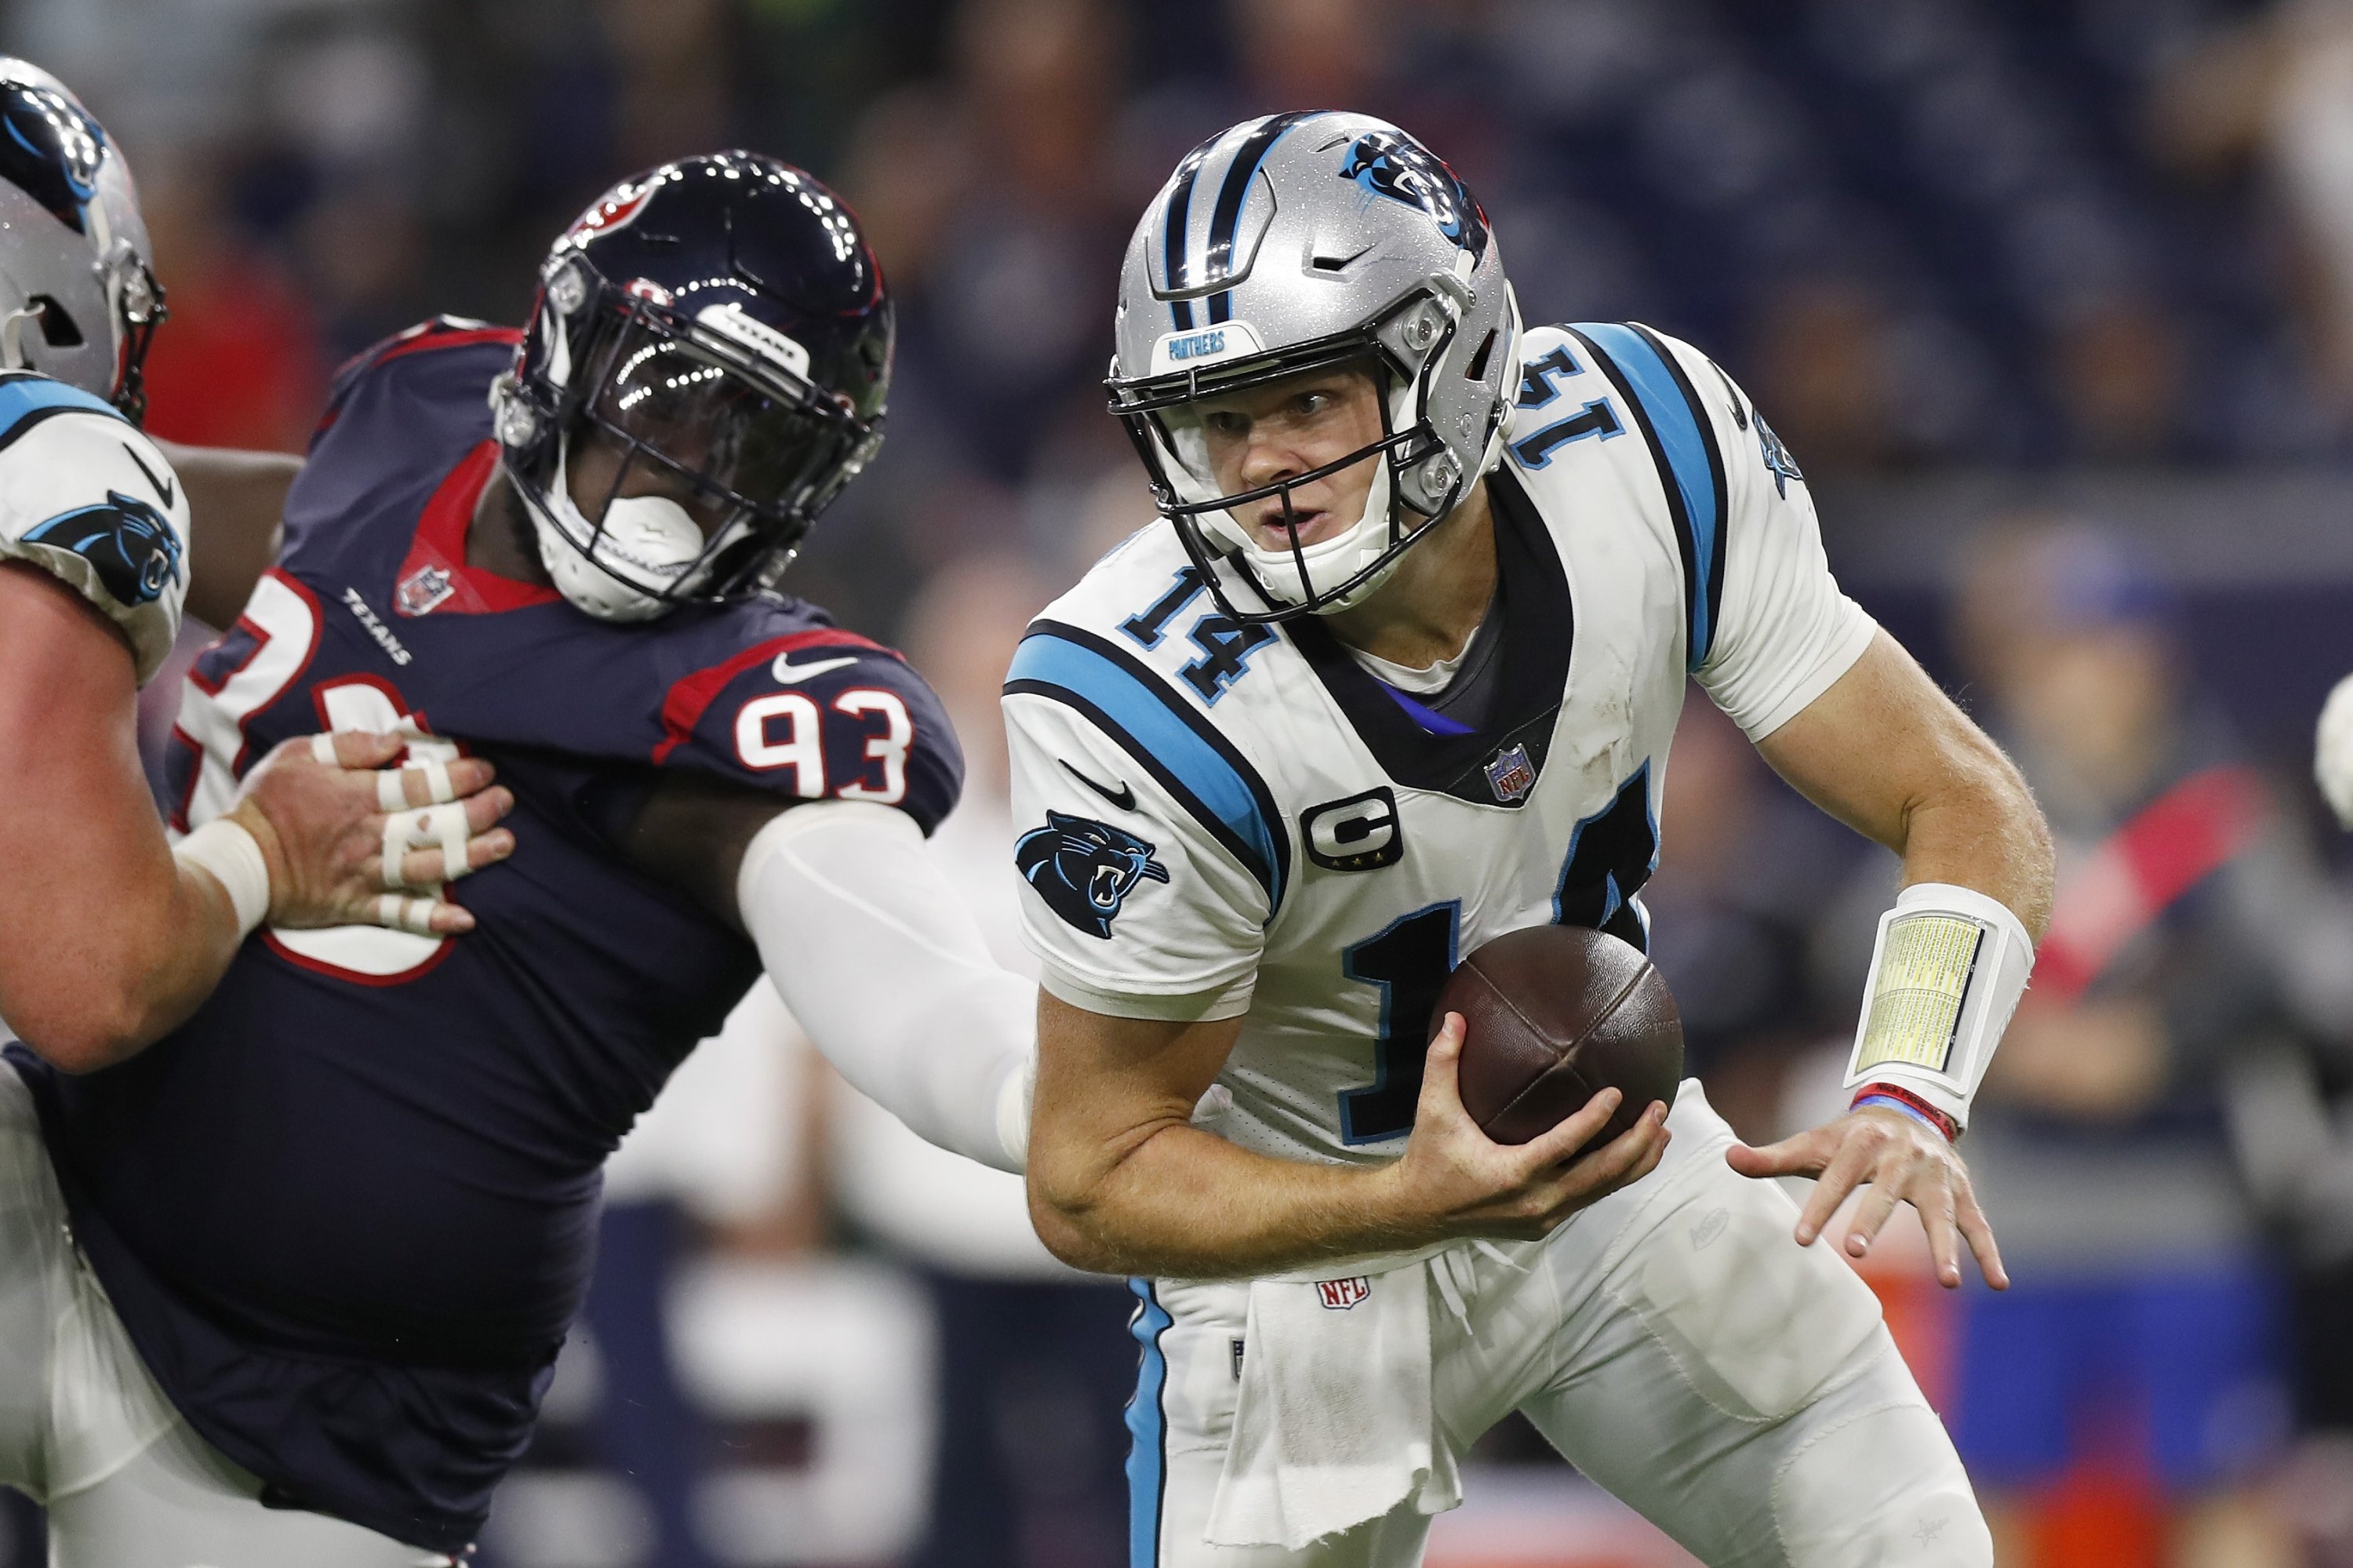 Sam Darnold (14) of the Carolina Panthers tries to escape the tackle of Jaleel Johnson of the Houston Texans during the first half at NRG Stadium, Houston, Texas, U.S., Sept. 23, 2021. (AFP Photo)